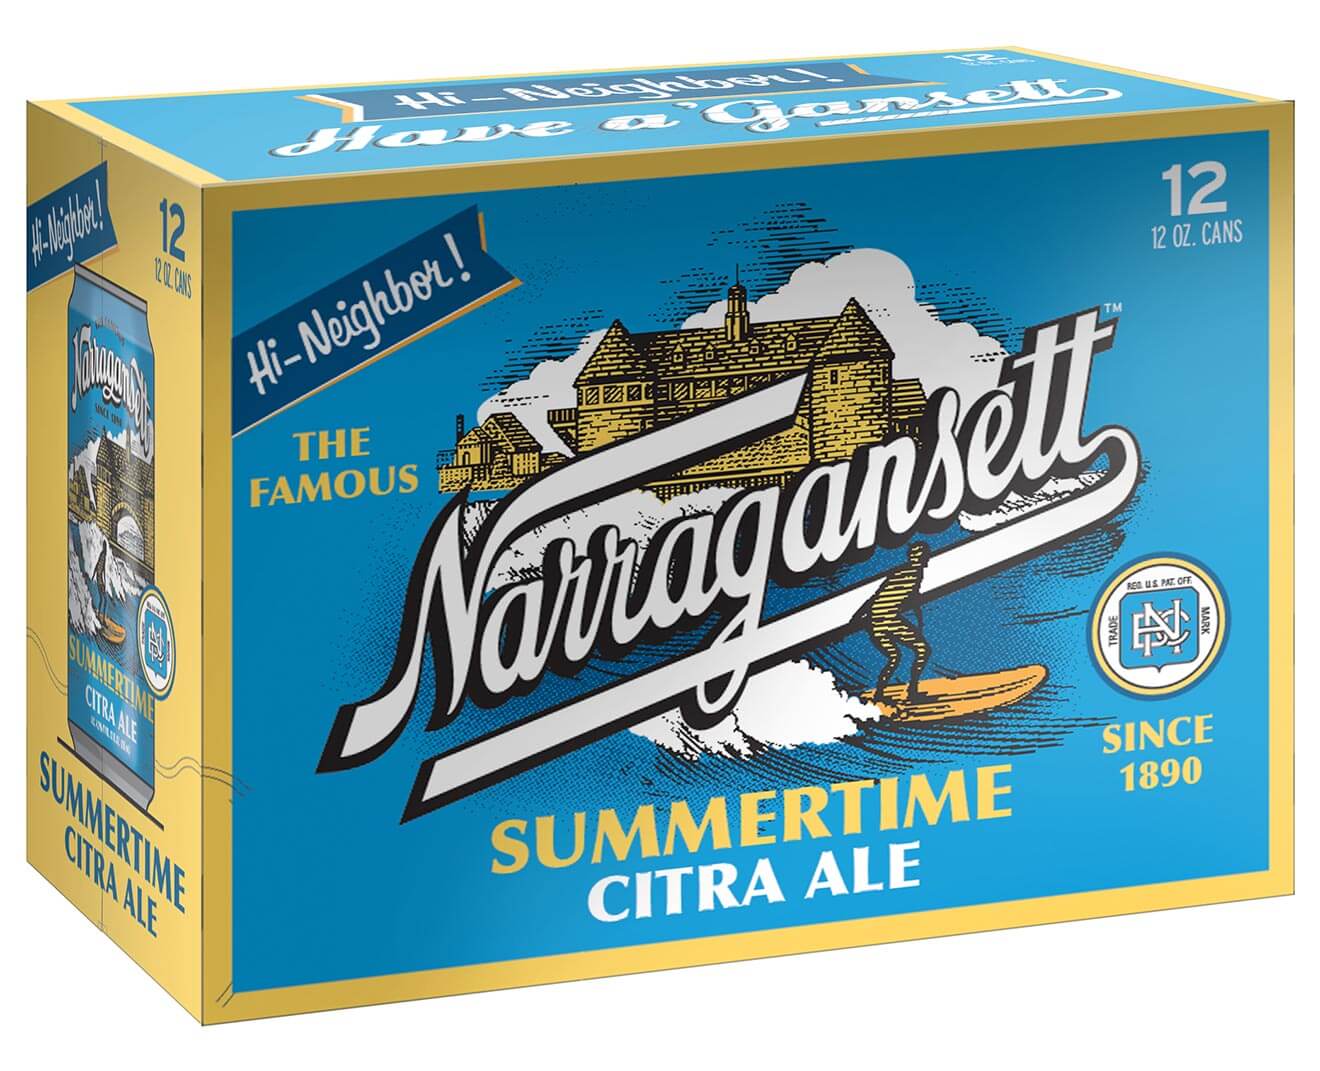 Summertime Citra Ale, beer news, featured image